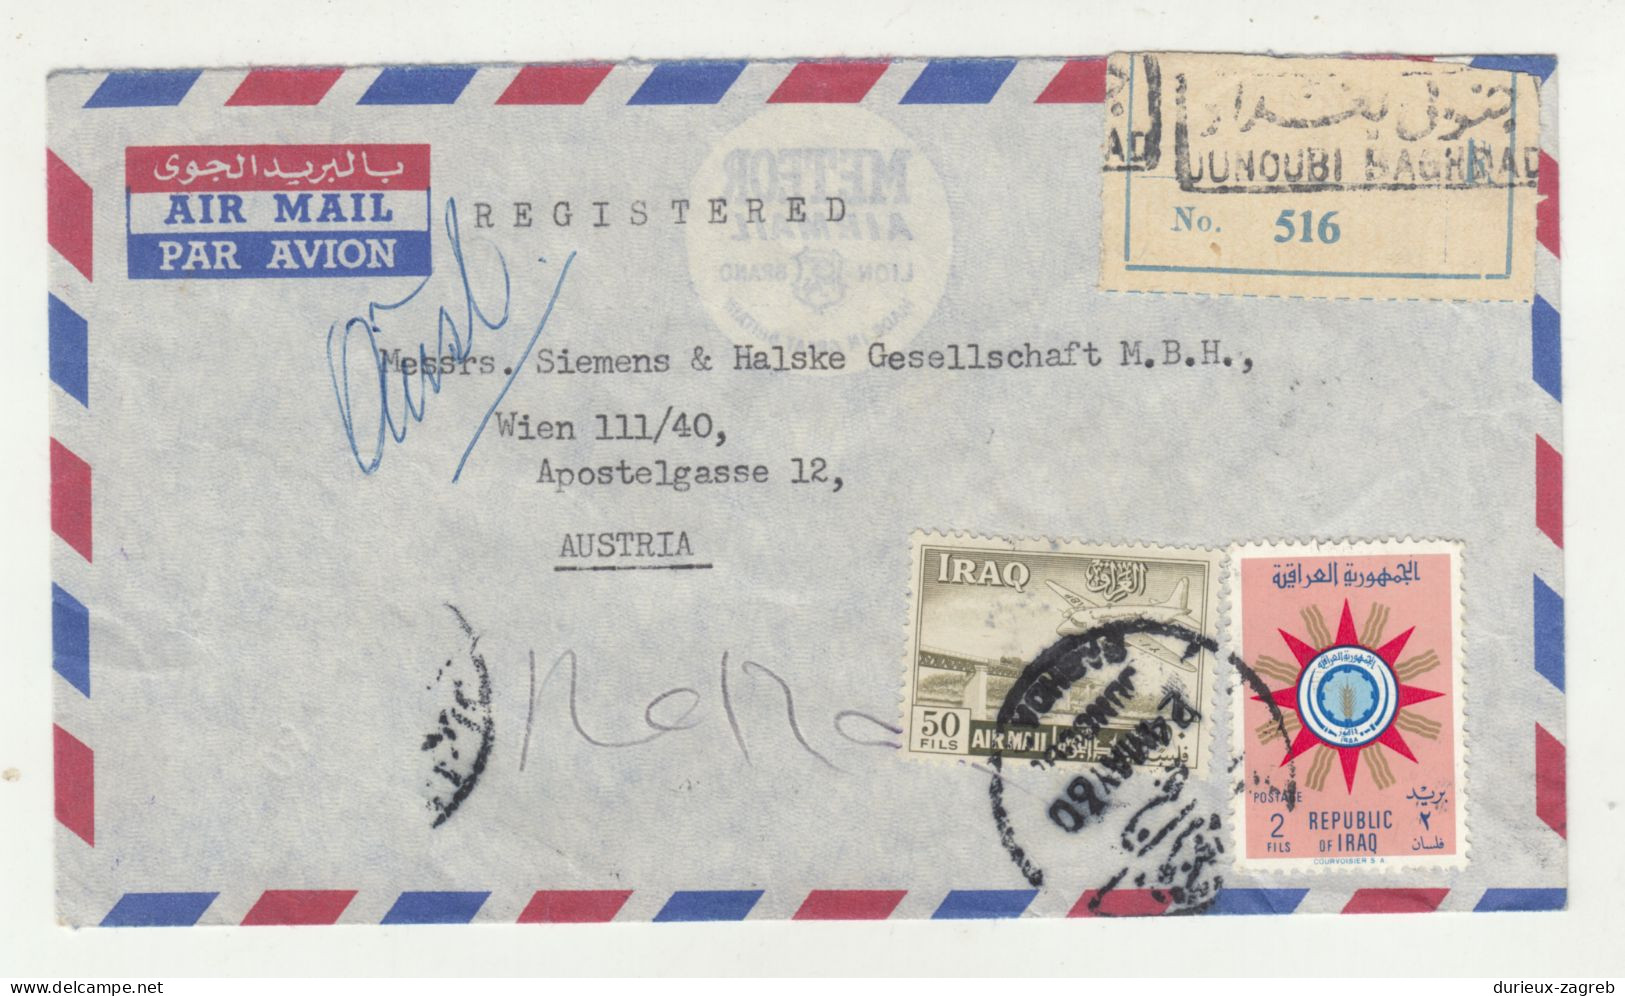 Khavat & Company, Baghdad Company Air Mail Letter Cover Posted Registered 1960 To Austria B240503 - Irak